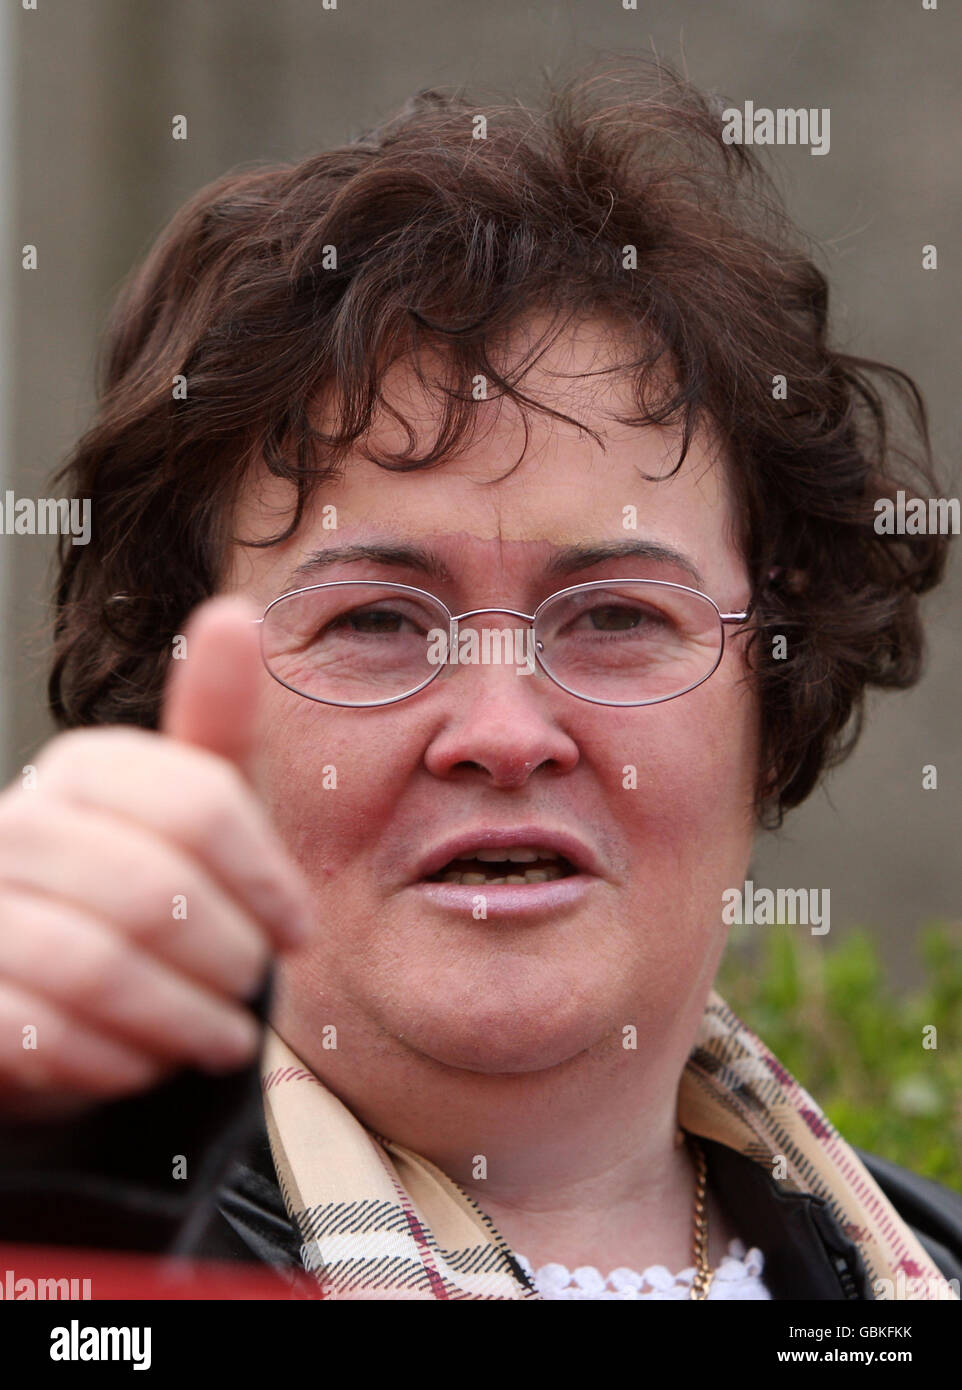 Britains Got Talent star Susan Boyle outside her home today with a new haircut in Blackburn, West Lothian Stock Photo